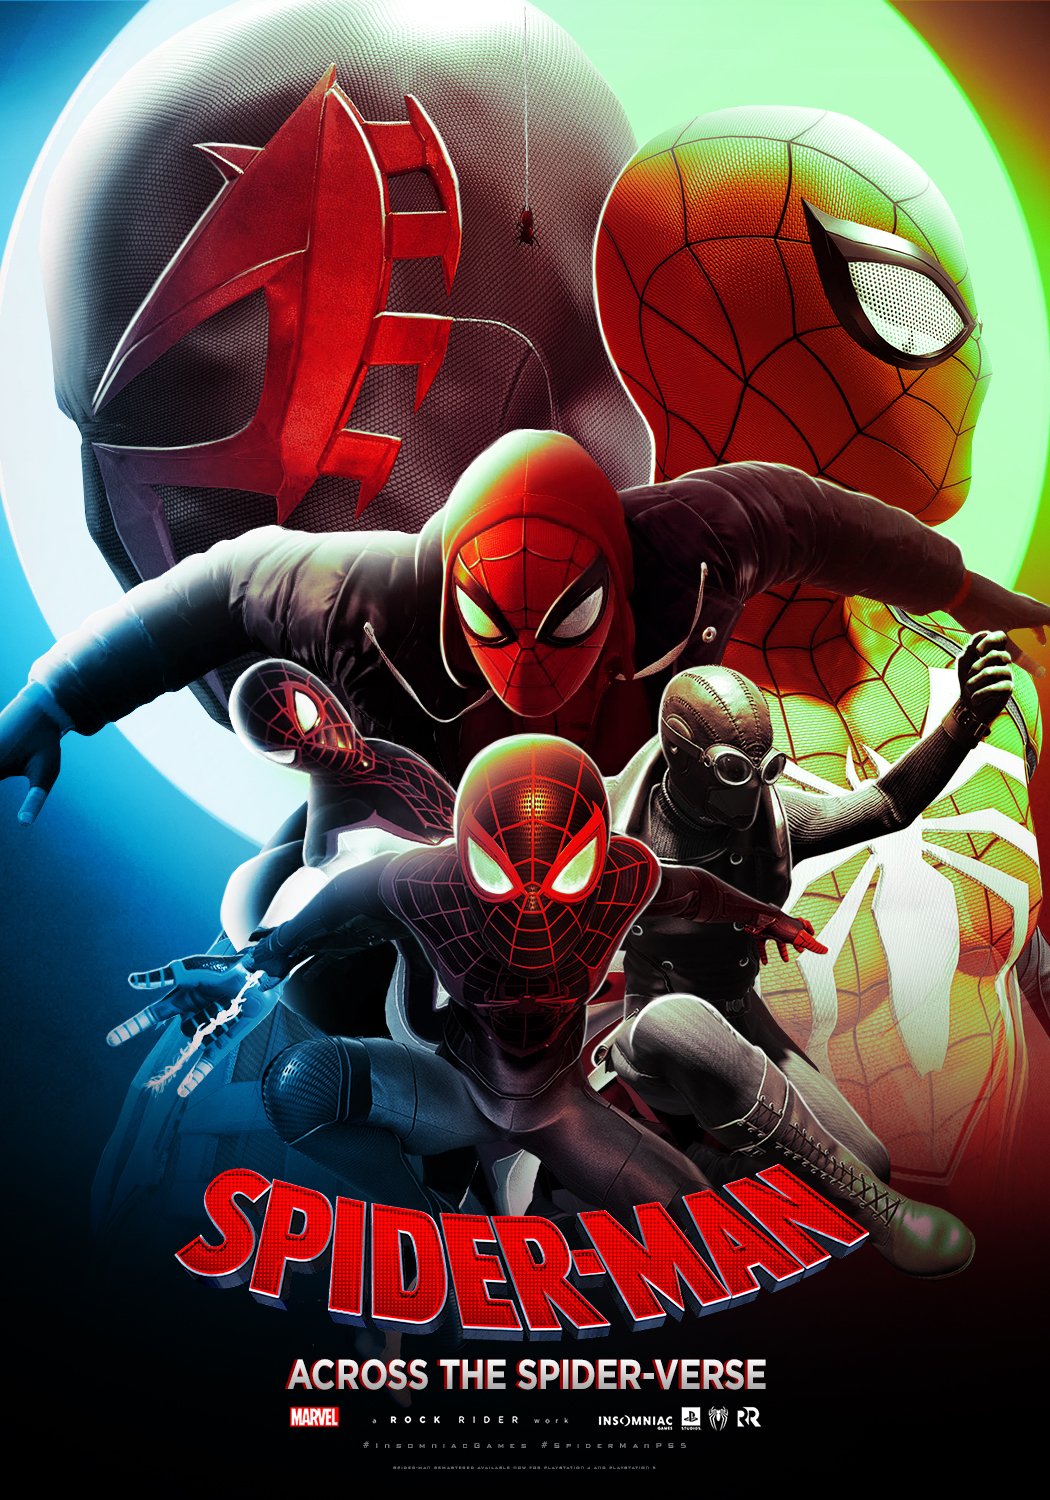 Across The Spider-Verse Extended Poster Puts Insomniac's Spider